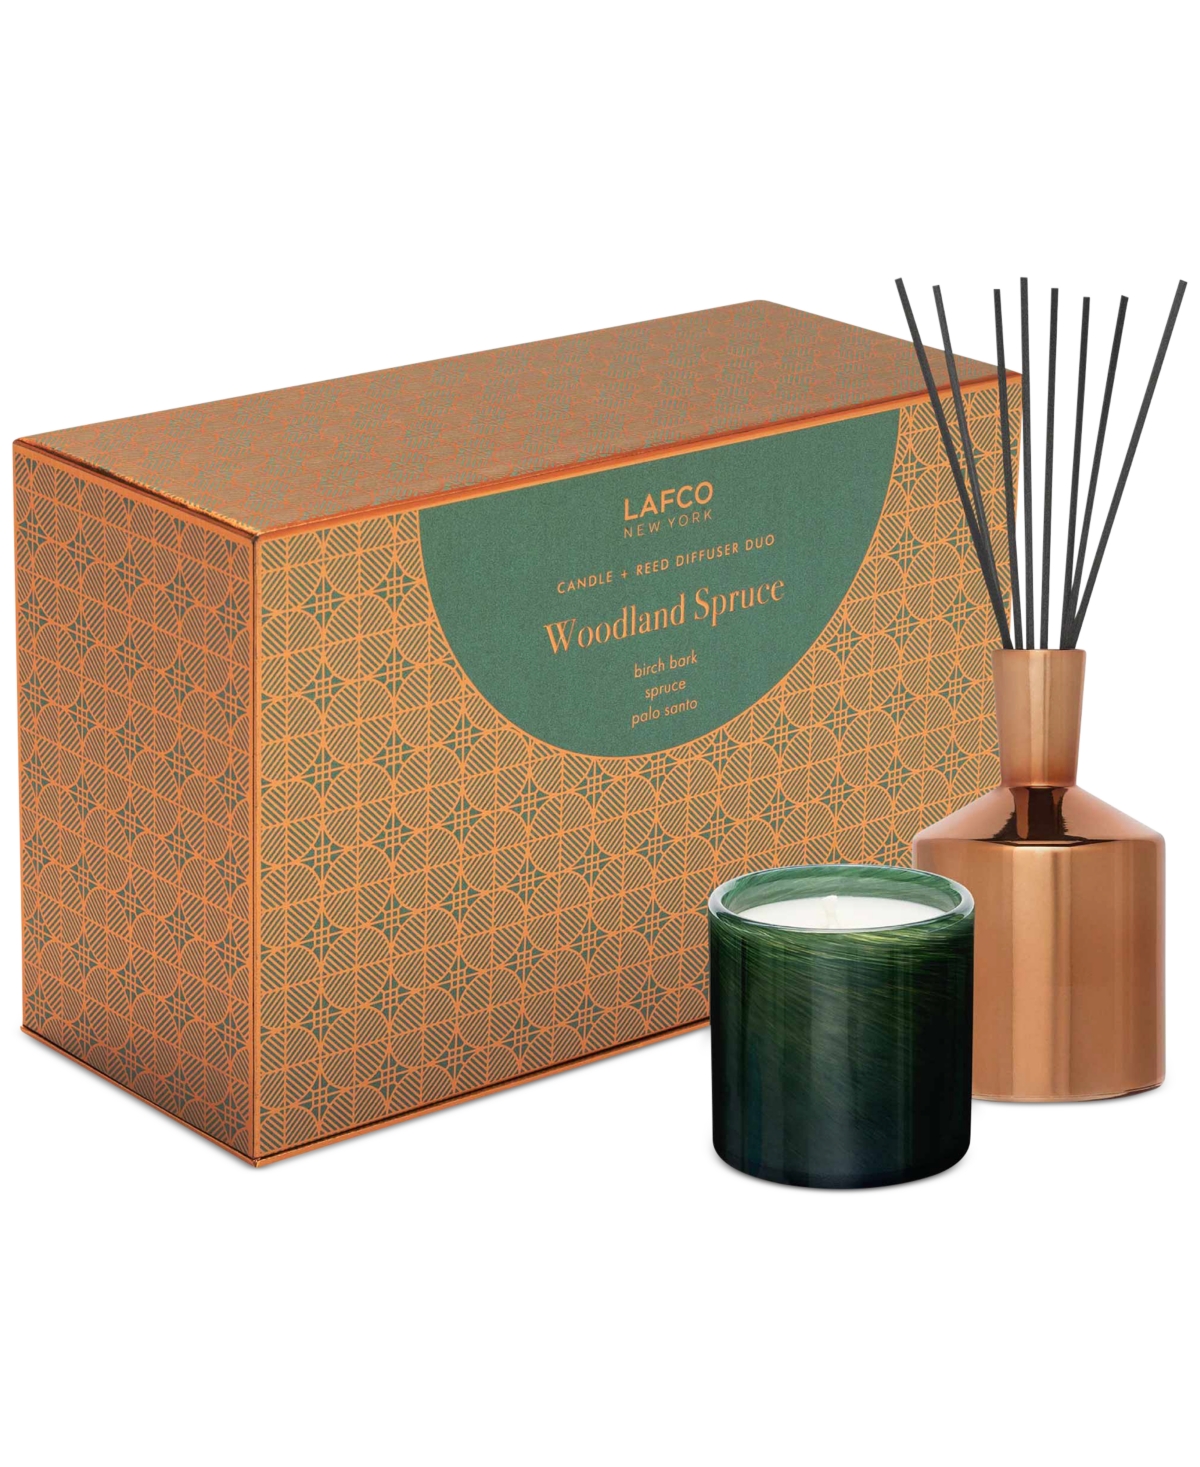 Lafco New York 2-pc. Wooodland Spruce Candle & Reed Diffuser Gift Set